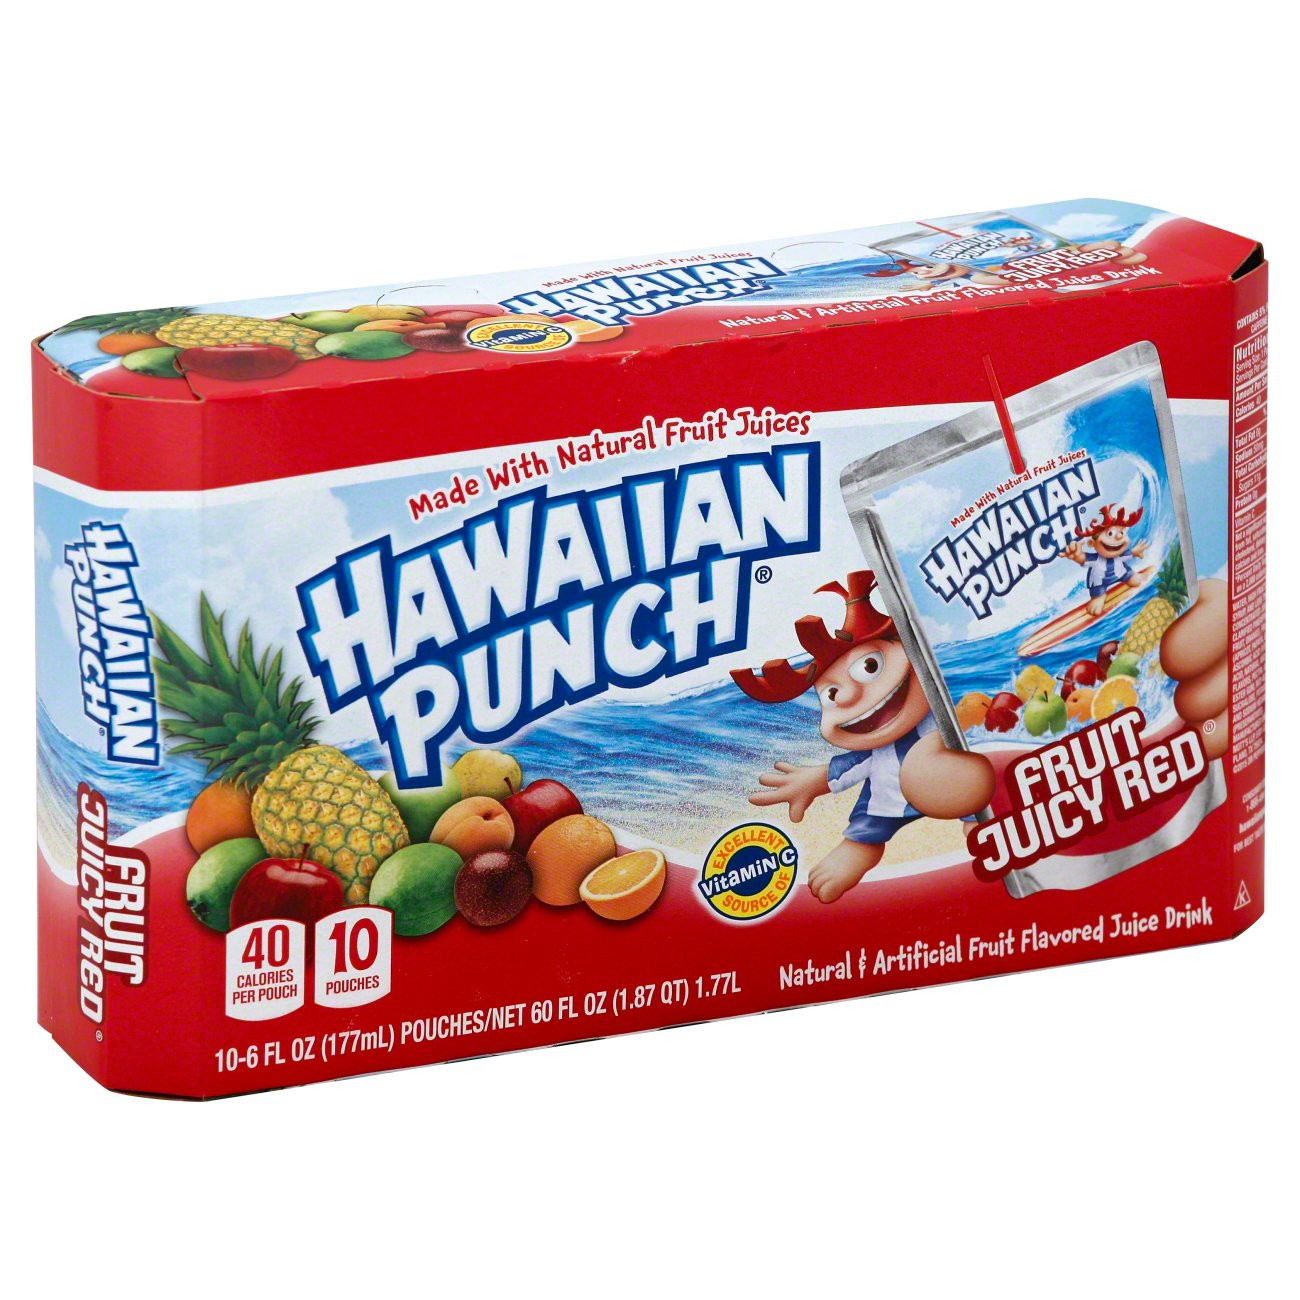 Hawaiian Punch Fruit Juicy Red Pouches 10 Count, 10 ct / 6 fl oz - Food 4  Less